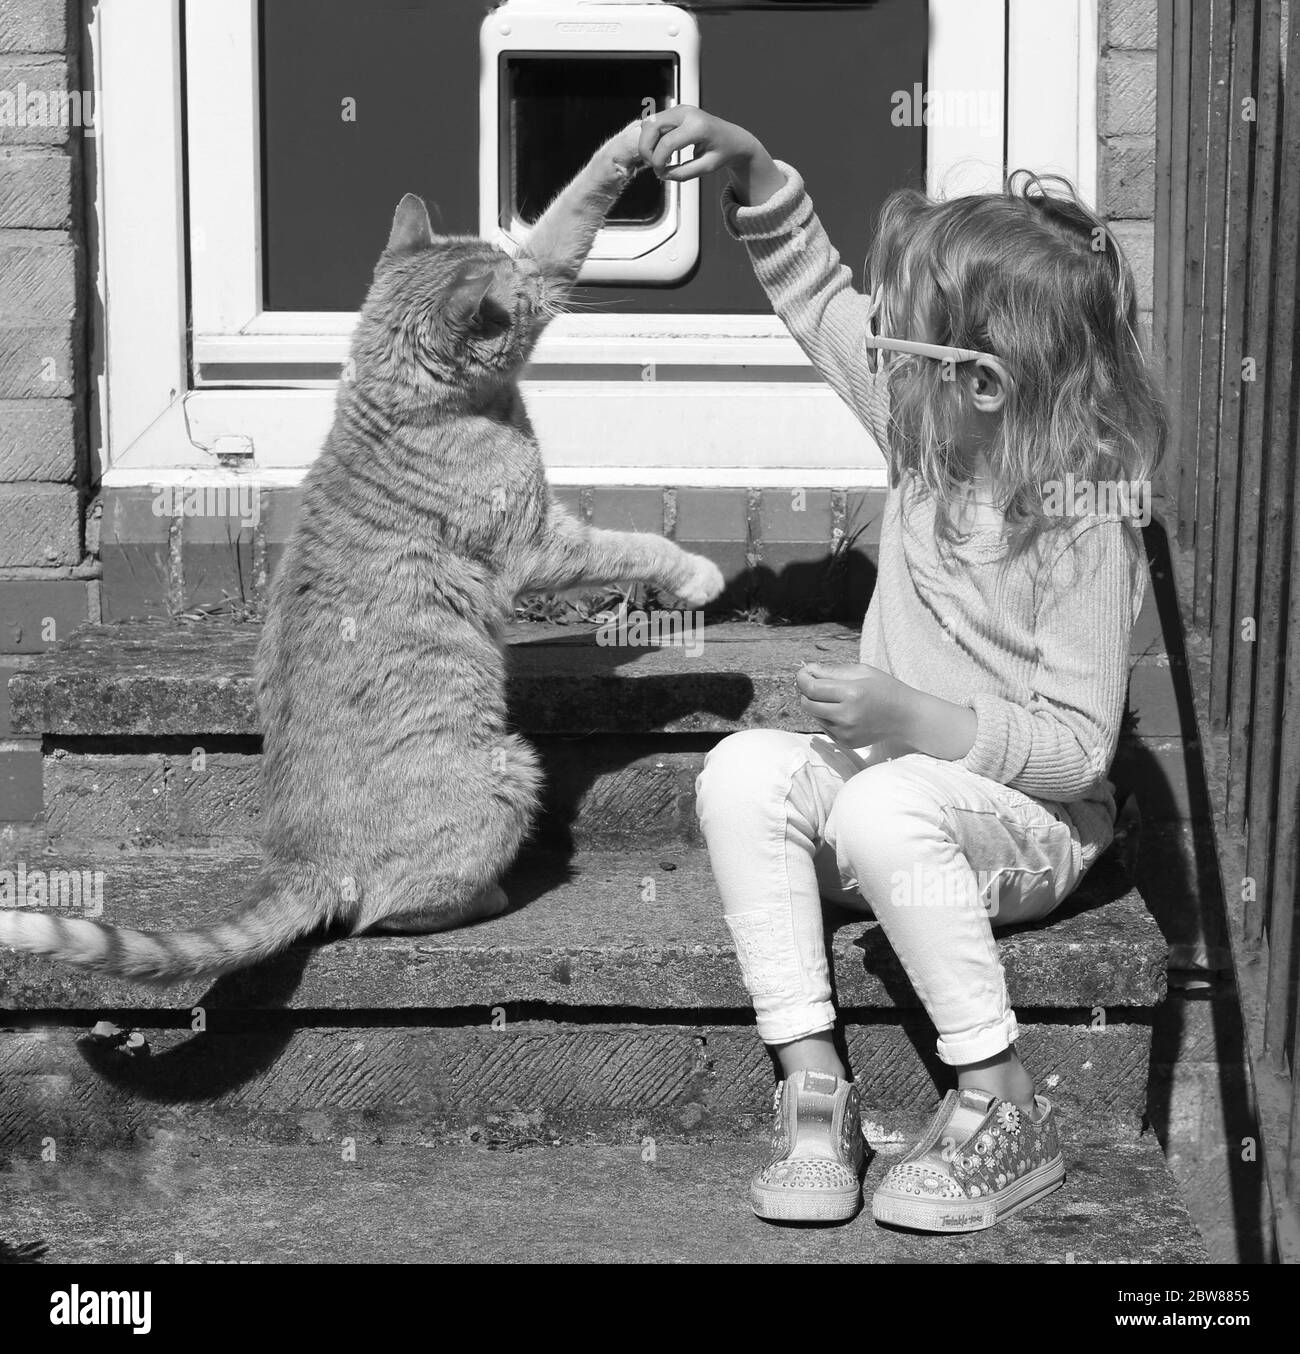 Young child and cat playing on doorstep. Black and white family doorstep portrait Stock Photo